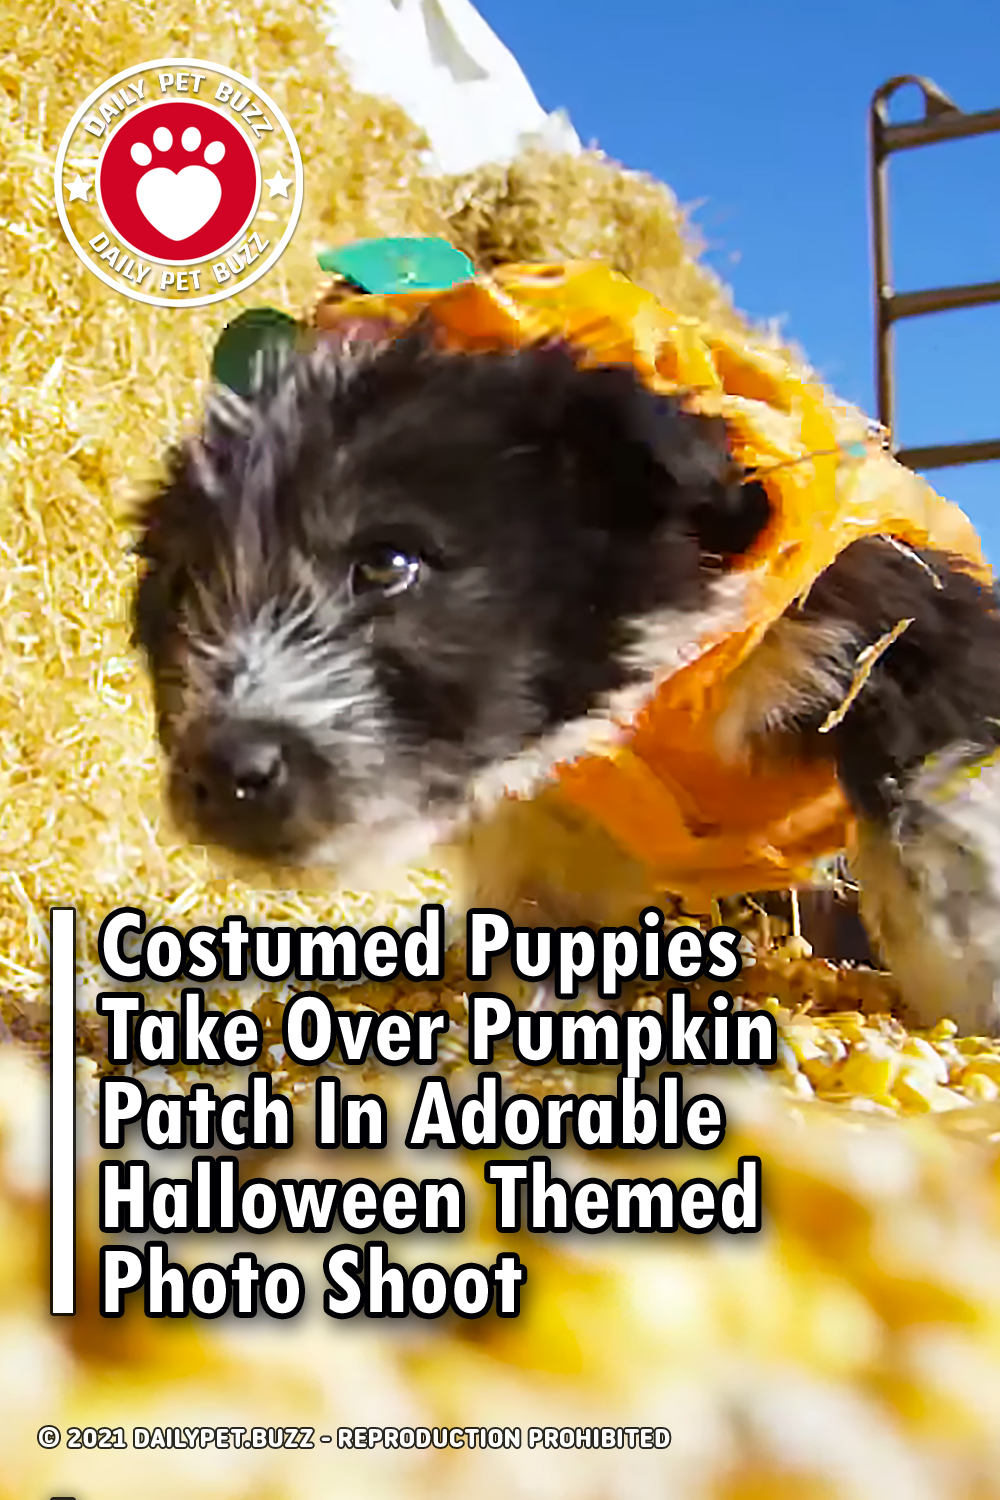 Costumed Puppies Take Over Pumpkin Patch In Adorable Halloween Themed Photo Shoot